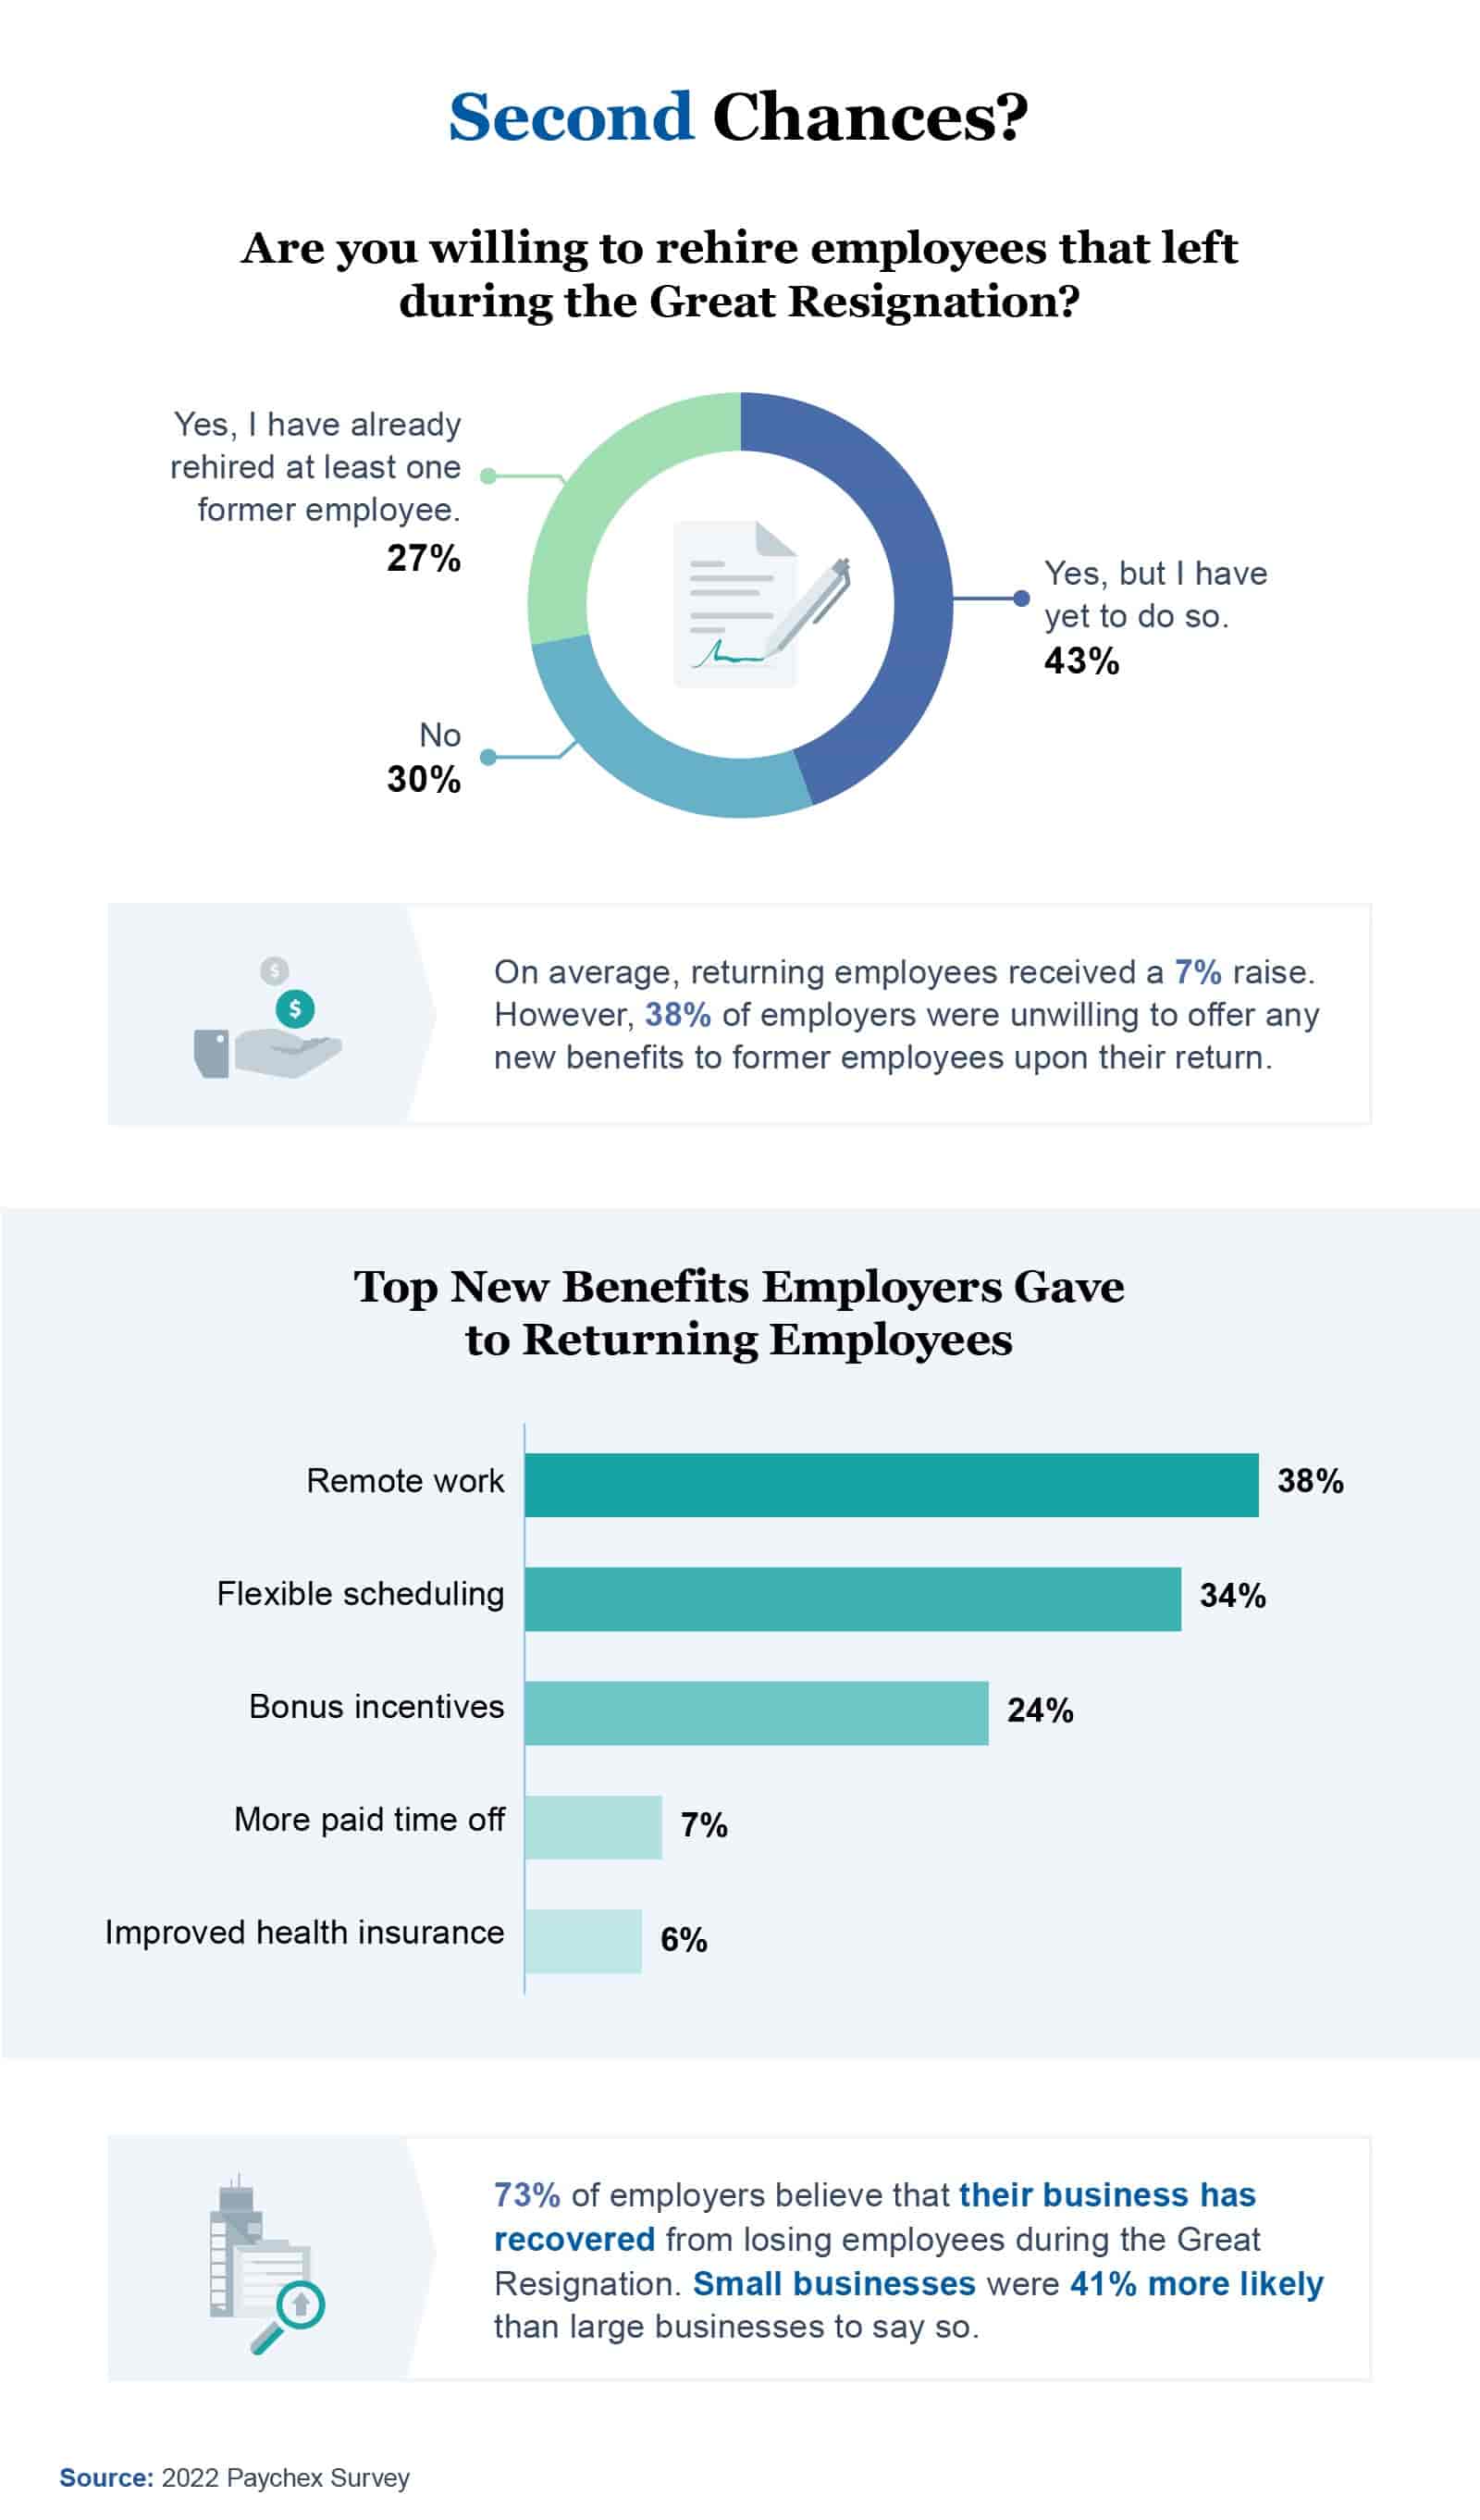 Infographic: Exploring the employer’s perspective, how many have rehired an employee that left during the Great Resignation?